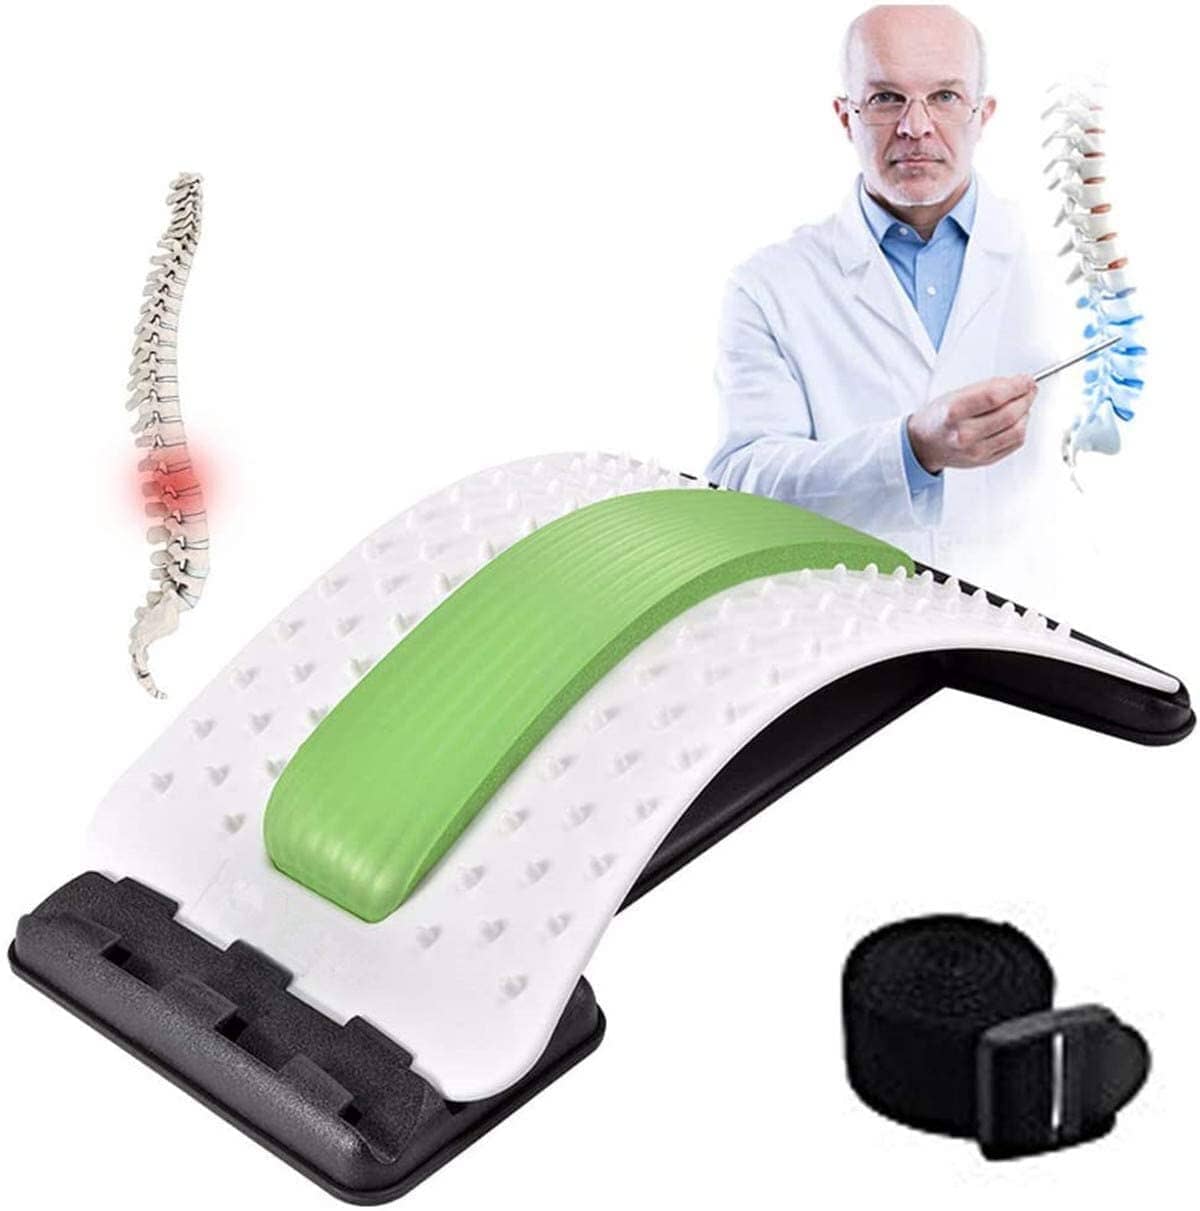 TQS Back Pain Relief Product Back Stretcher, Spinal Curve Back